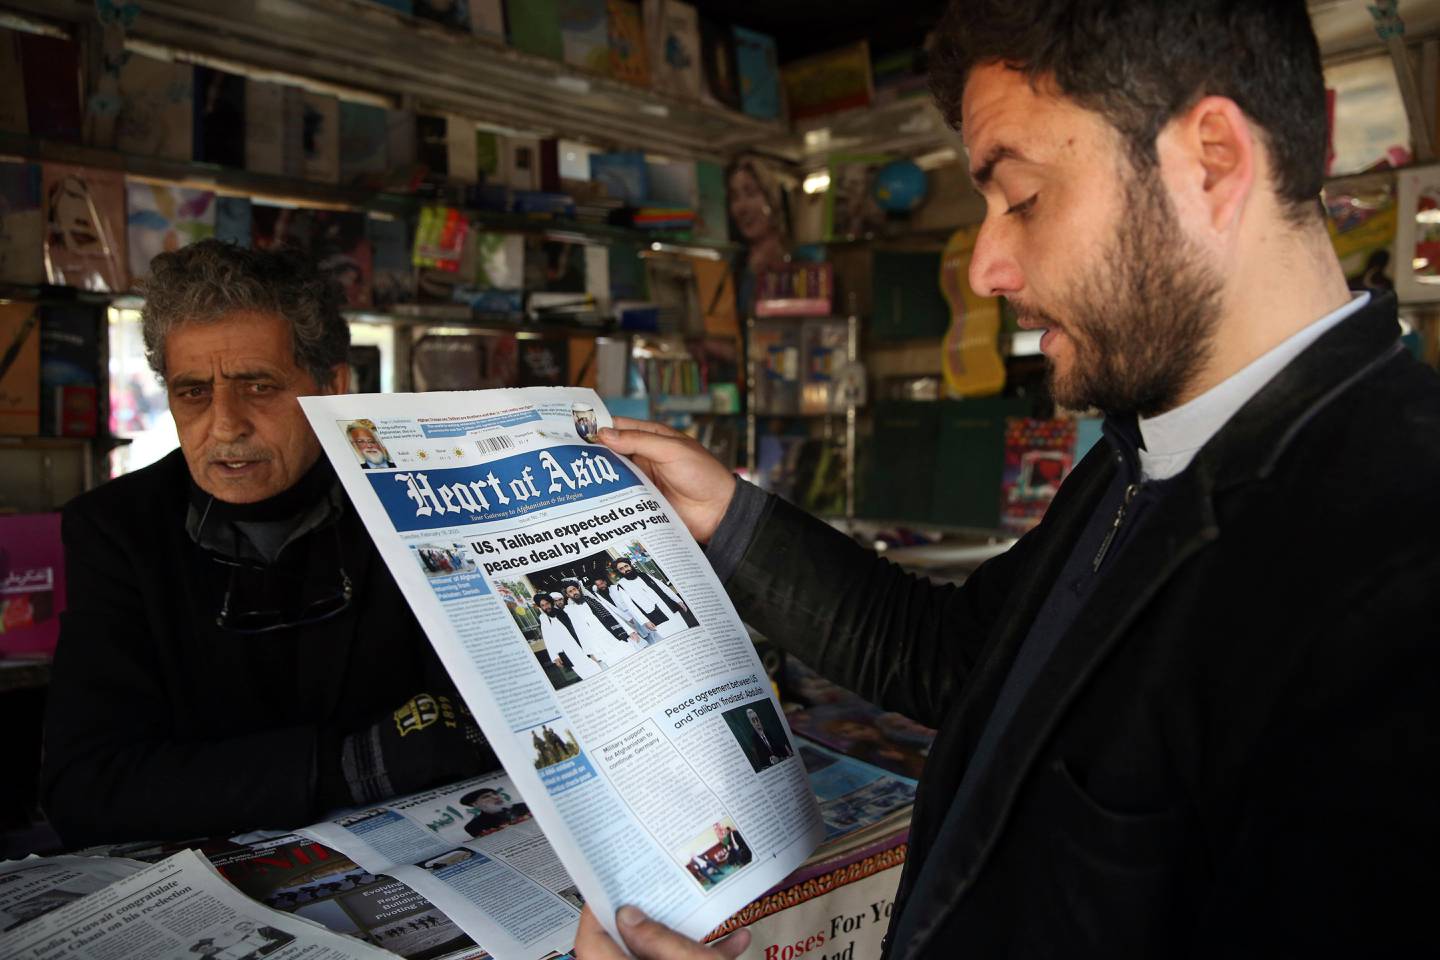 A man reads a newspaper about peace talks in Kabul, Afghanistan. Saturday, Feb. 22, 2020. A temporary truce between the United States and the Taliban took effect on Friday, setting the stage for the two sides to sign a peace deal next week aimed at ending 18 years of war in Afghanistan and bringing U.S. troops home. (AP Photo/Rahmat Gul)